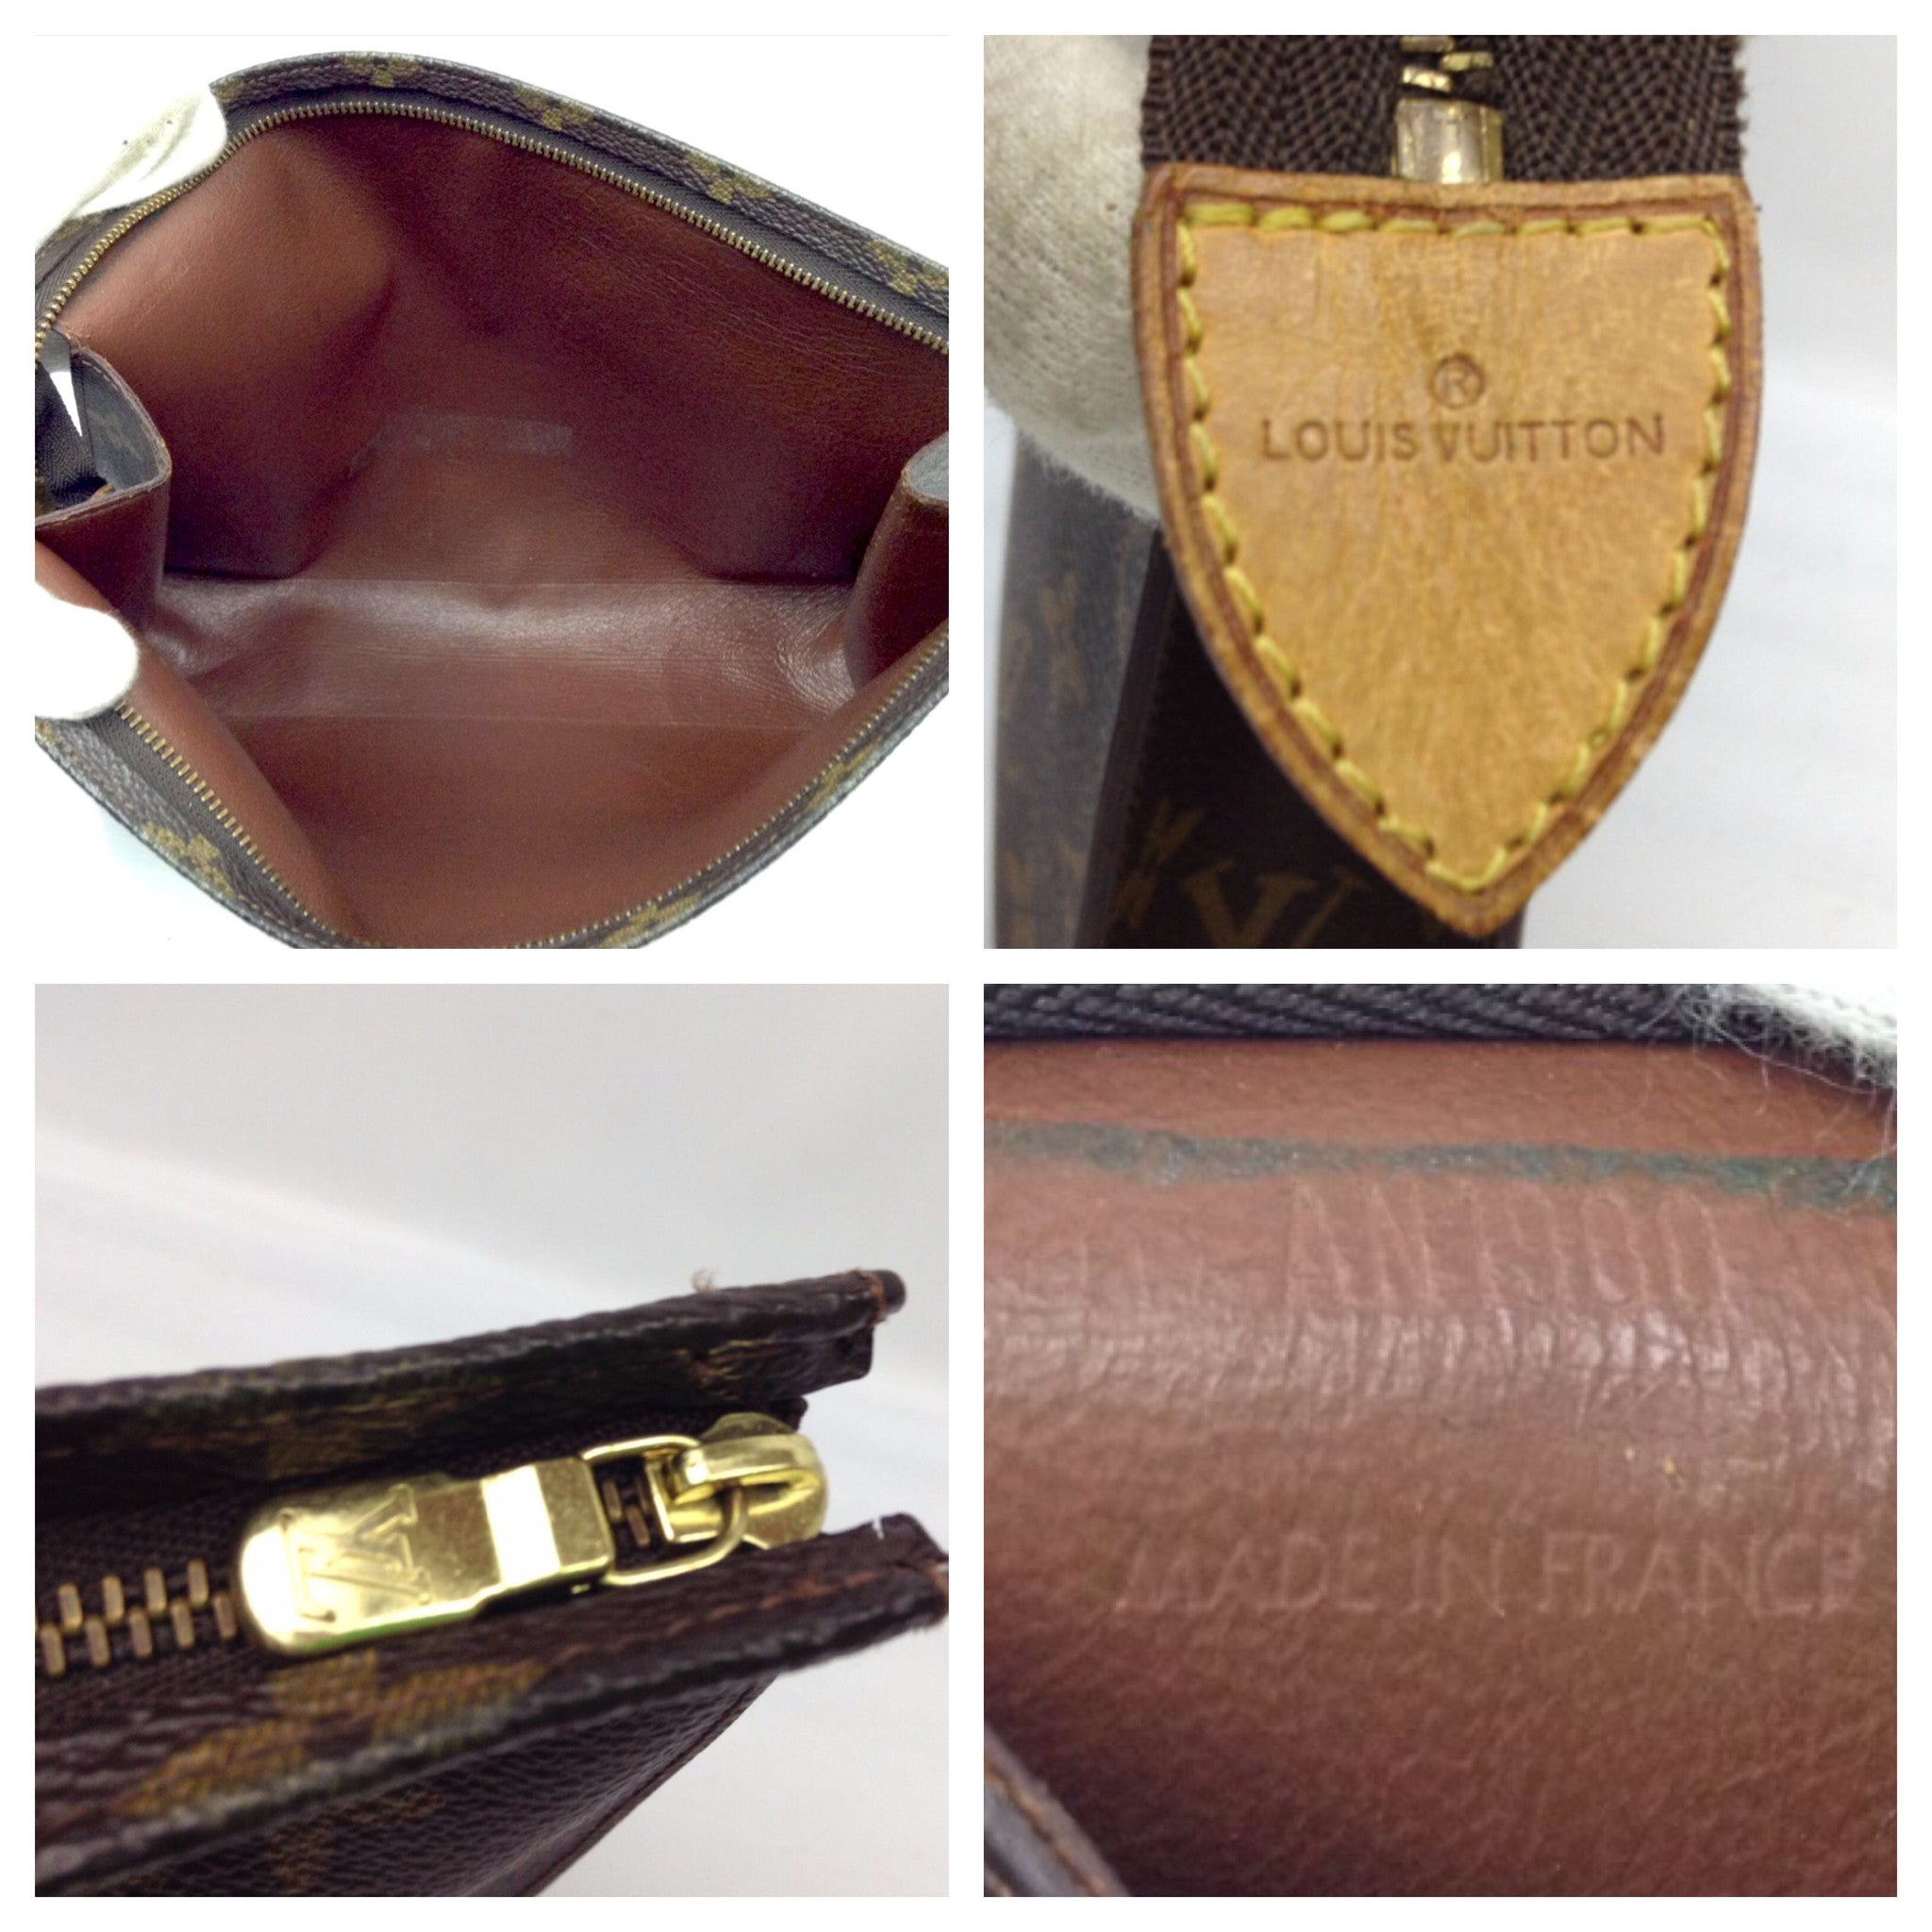 LOUIS VUITTON Cosmetic Pouch